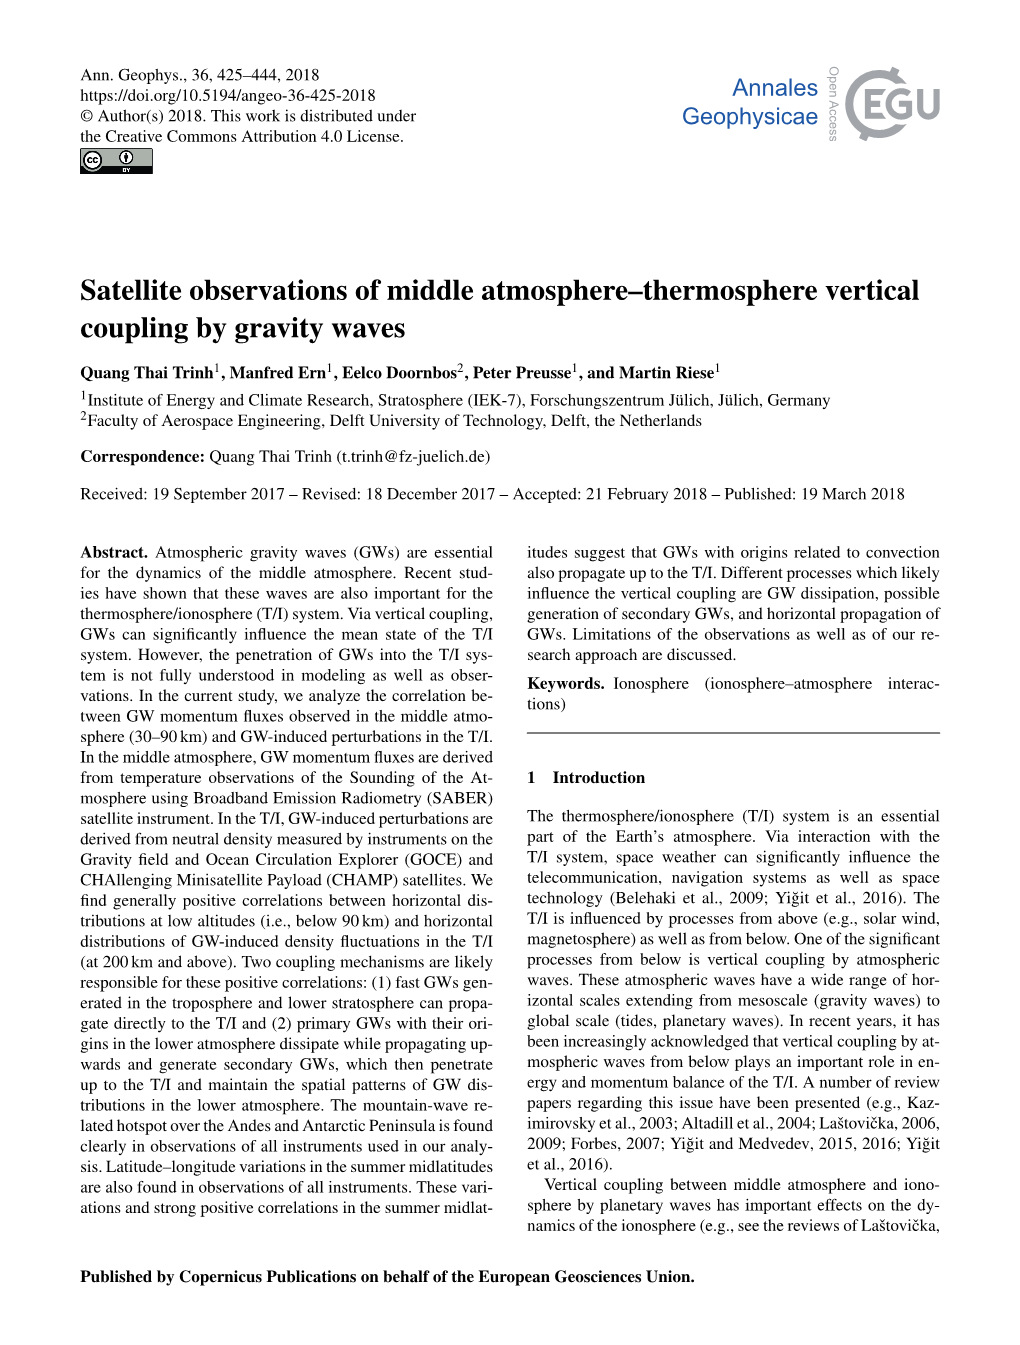 Satellite Observations of Middle Atmosphere–Thermosphere Vertical Coupling by Gravity Waves